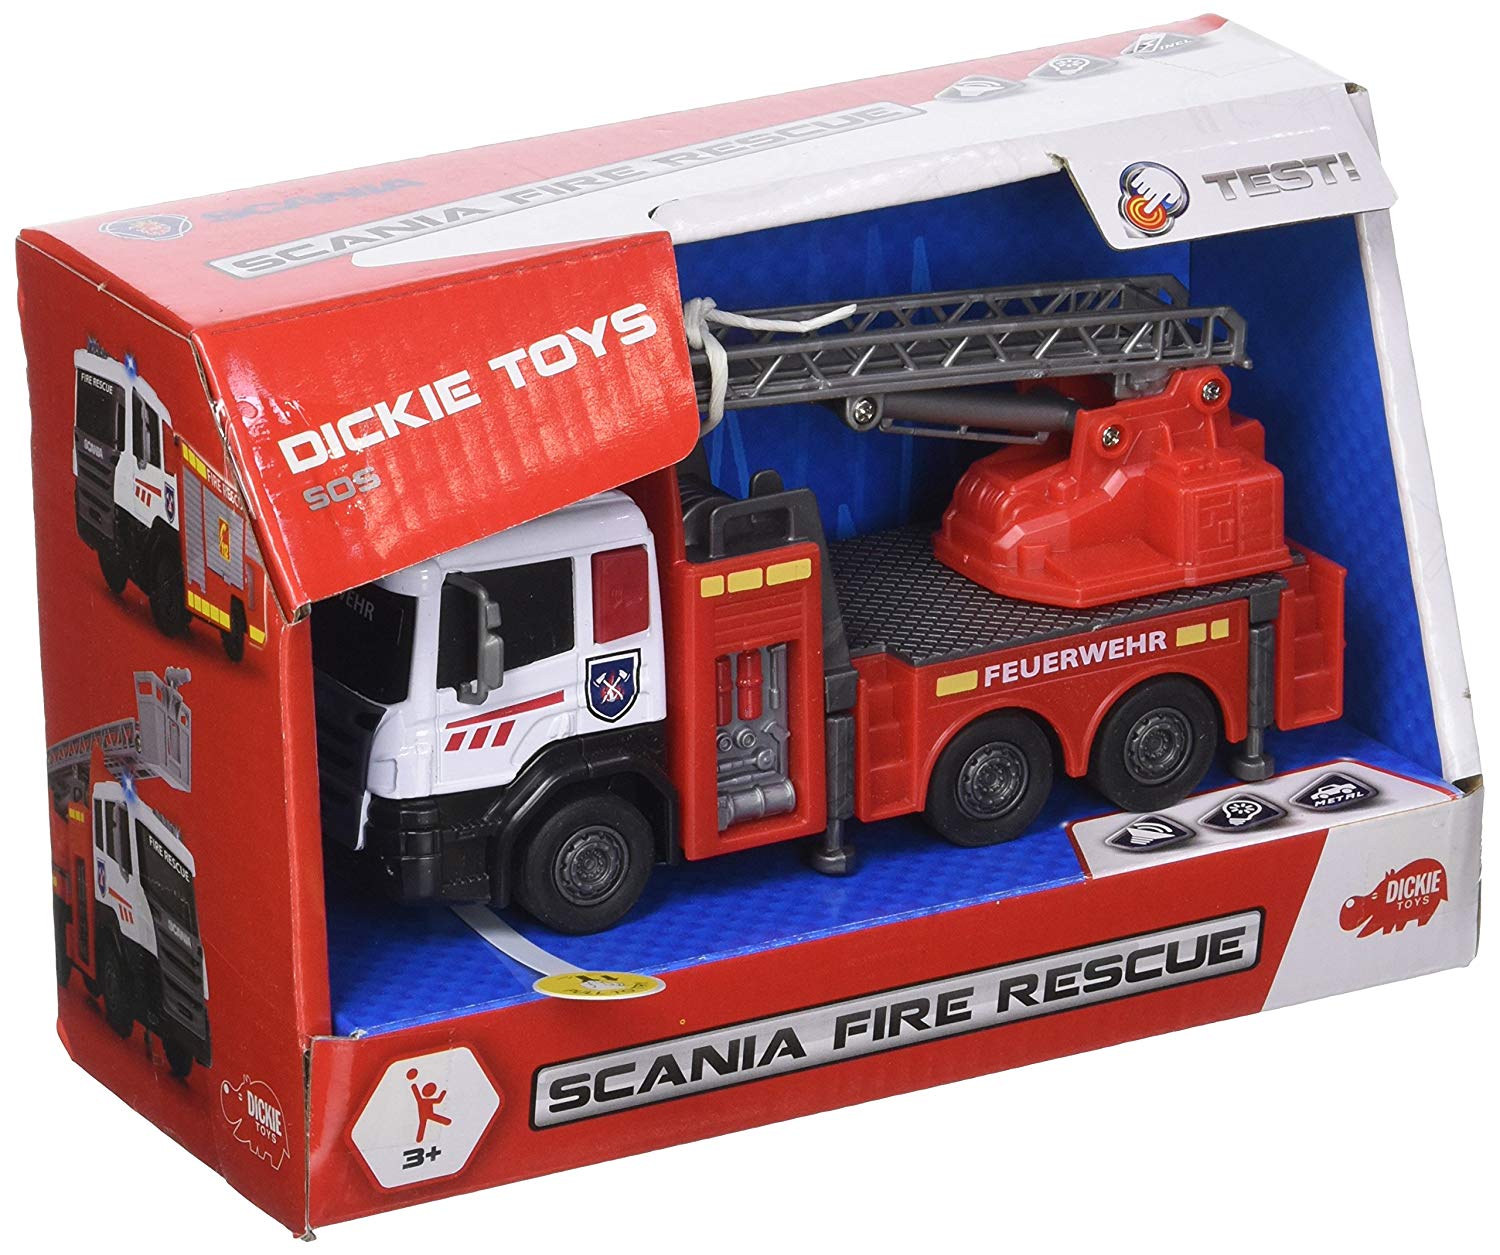 Dickie Toys 203712013 Scania Fire Rescue Fire Engine With Metal Enclosure A